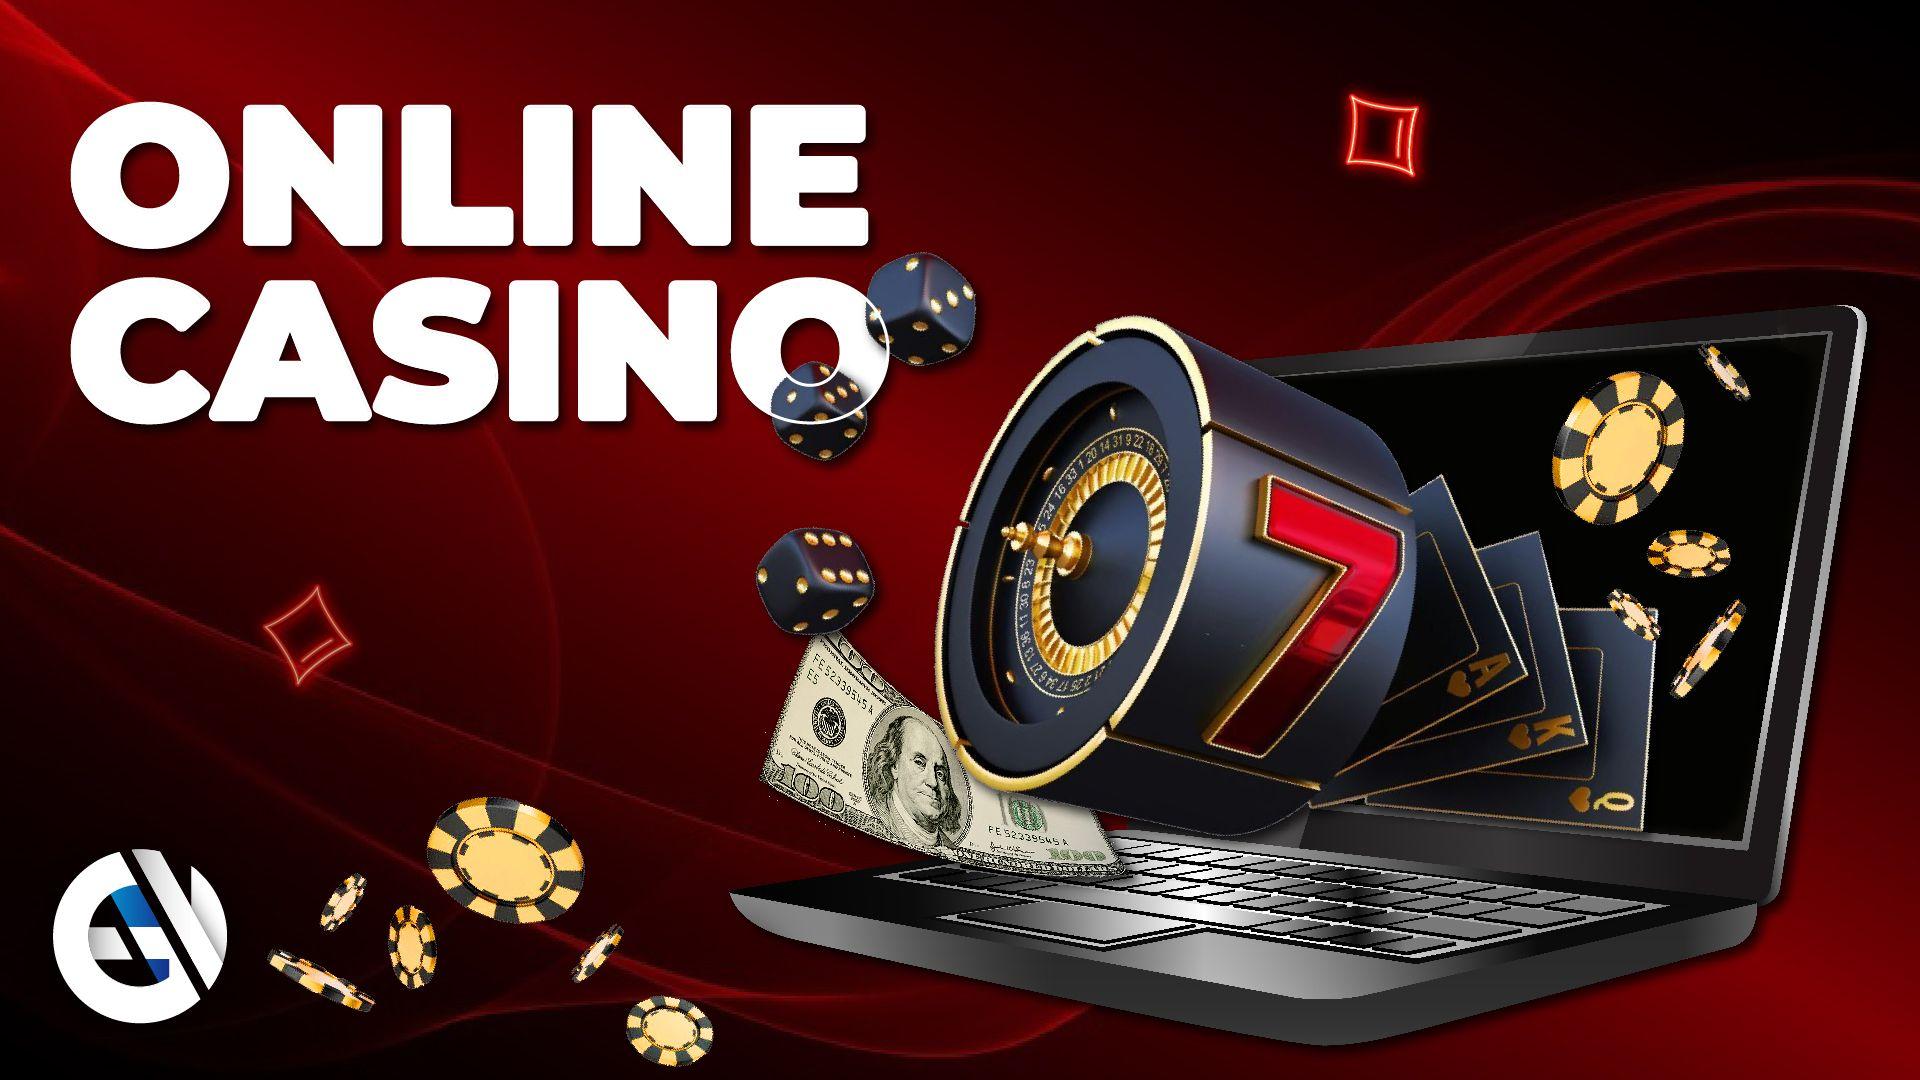 Which online casinos are the most popular among Finns